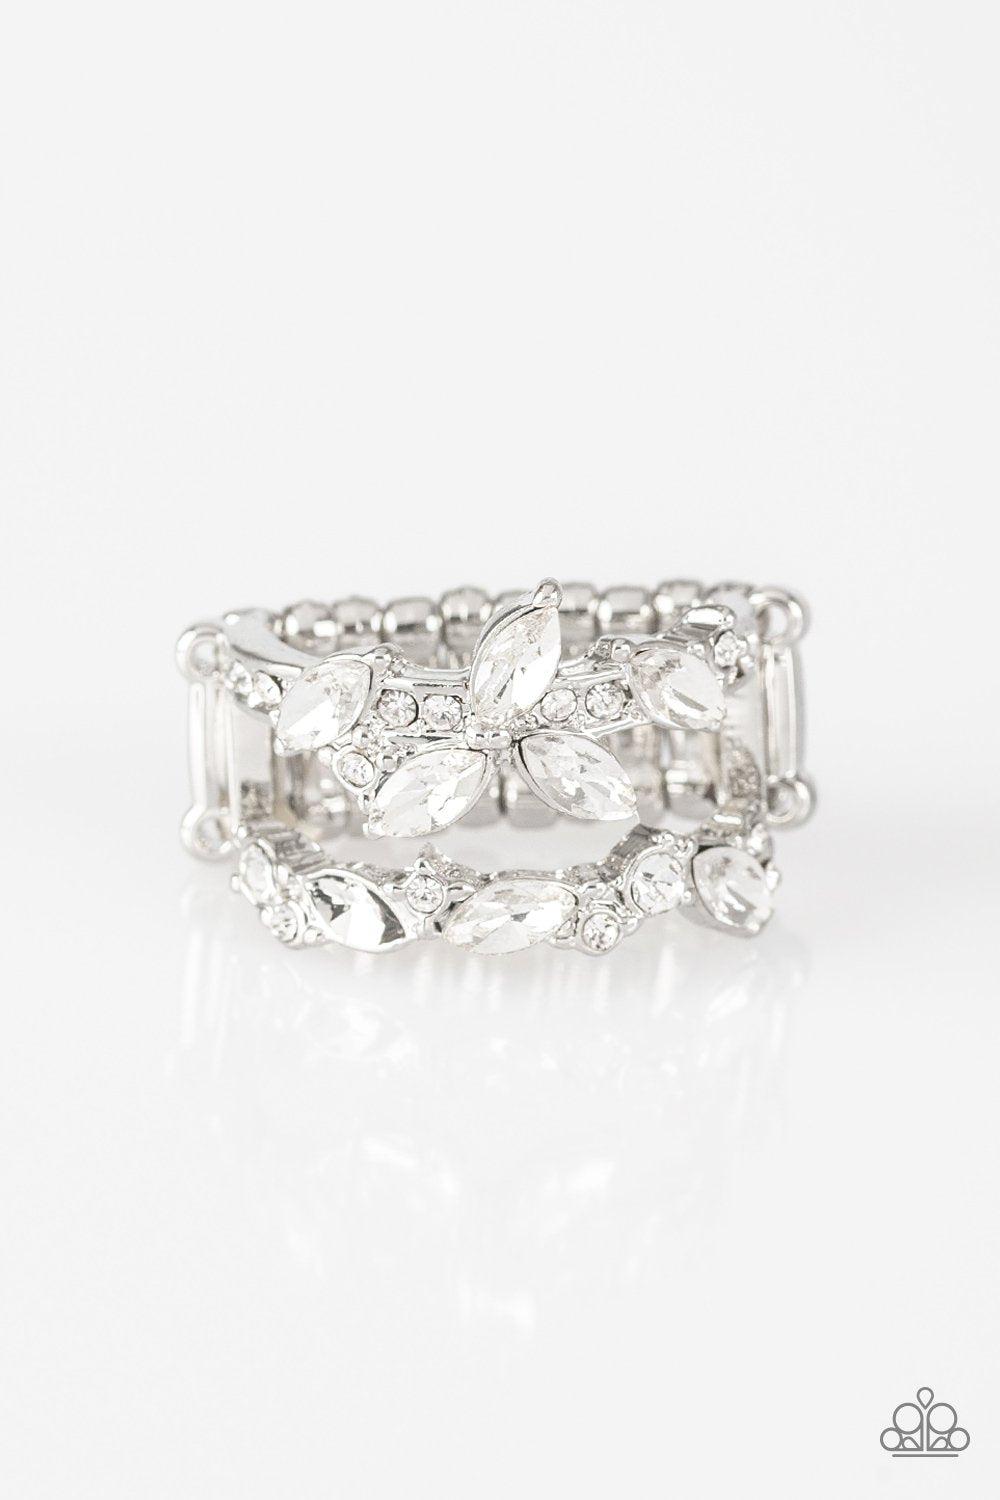 Cosmo Collection White Rhinestone Ring - Paparazzi Accessories-CarasShop.com - $5 Jewelry by Cara Jewels